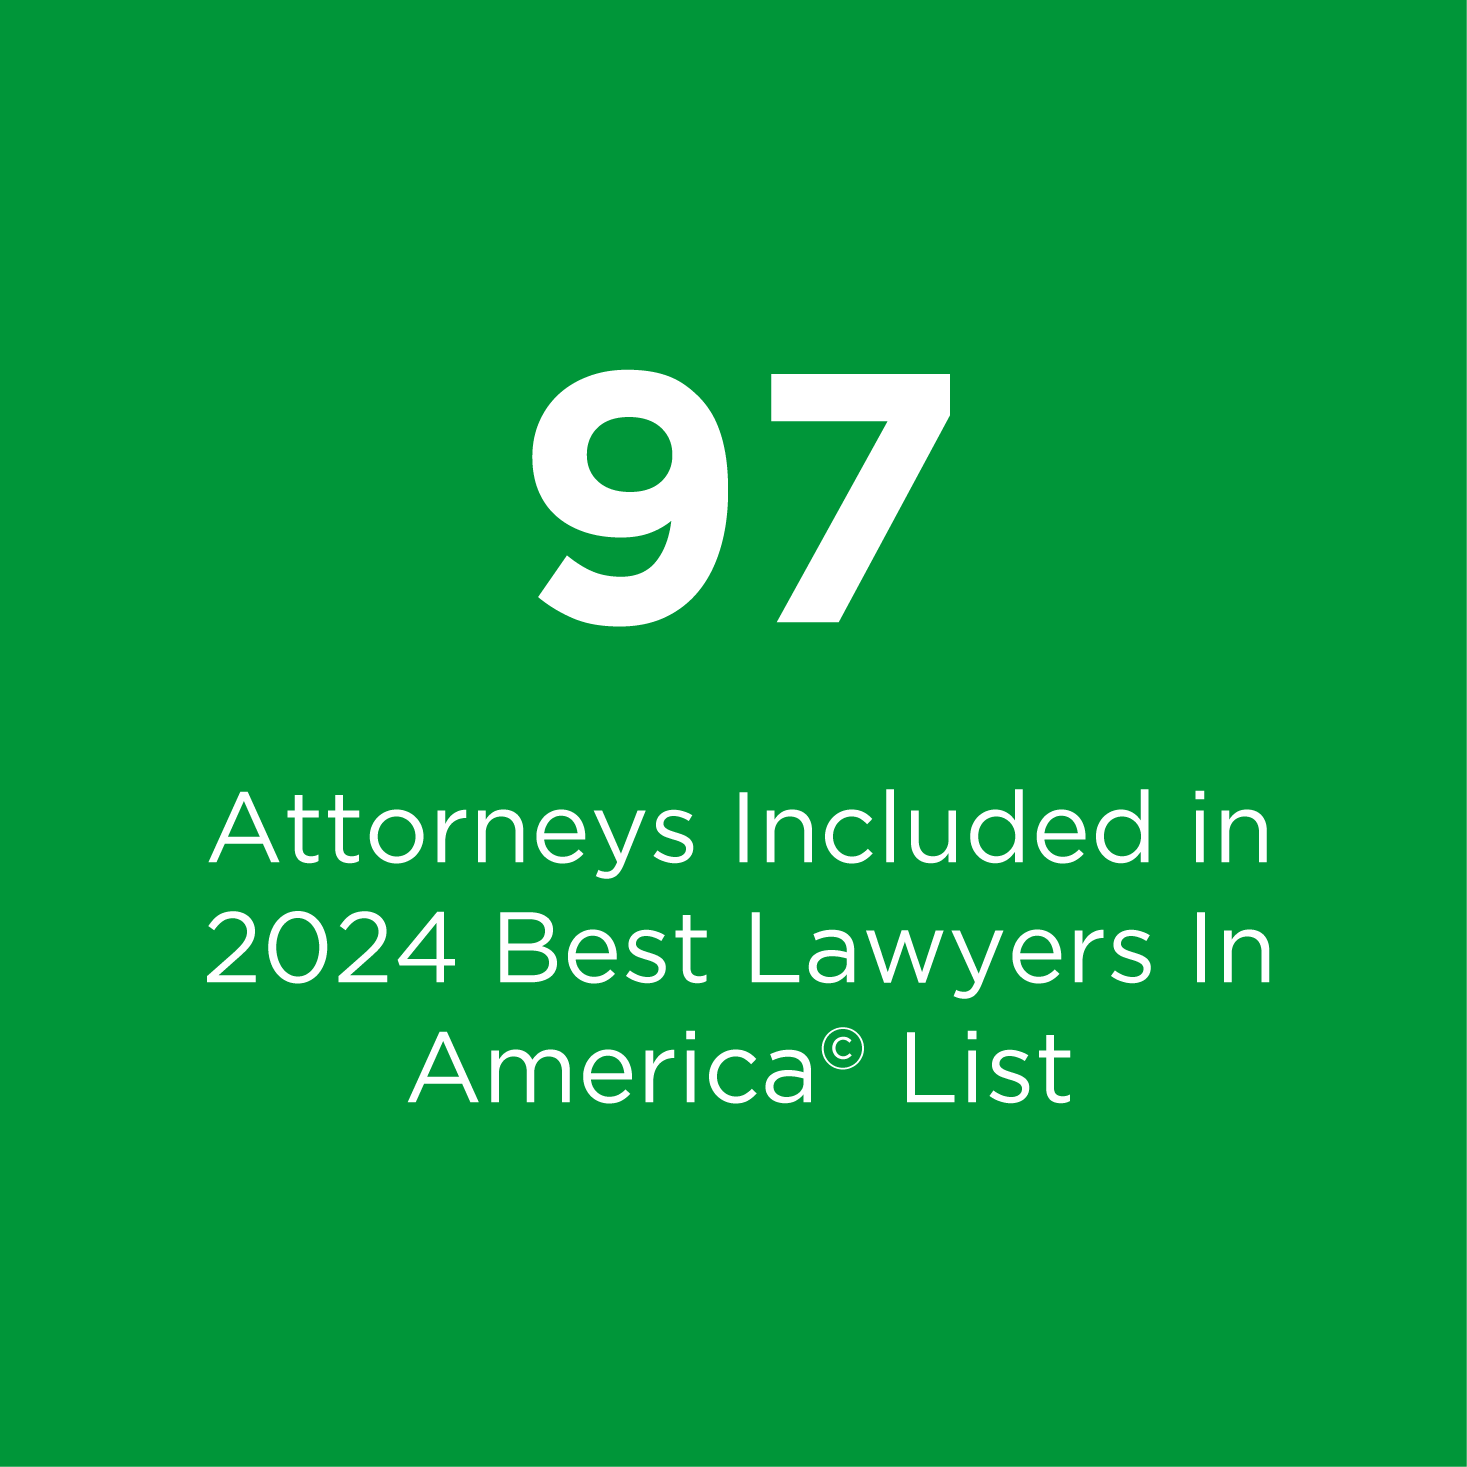 News - 88 Attorneys Included in 2022 Best Lawyers In America© List - 2022